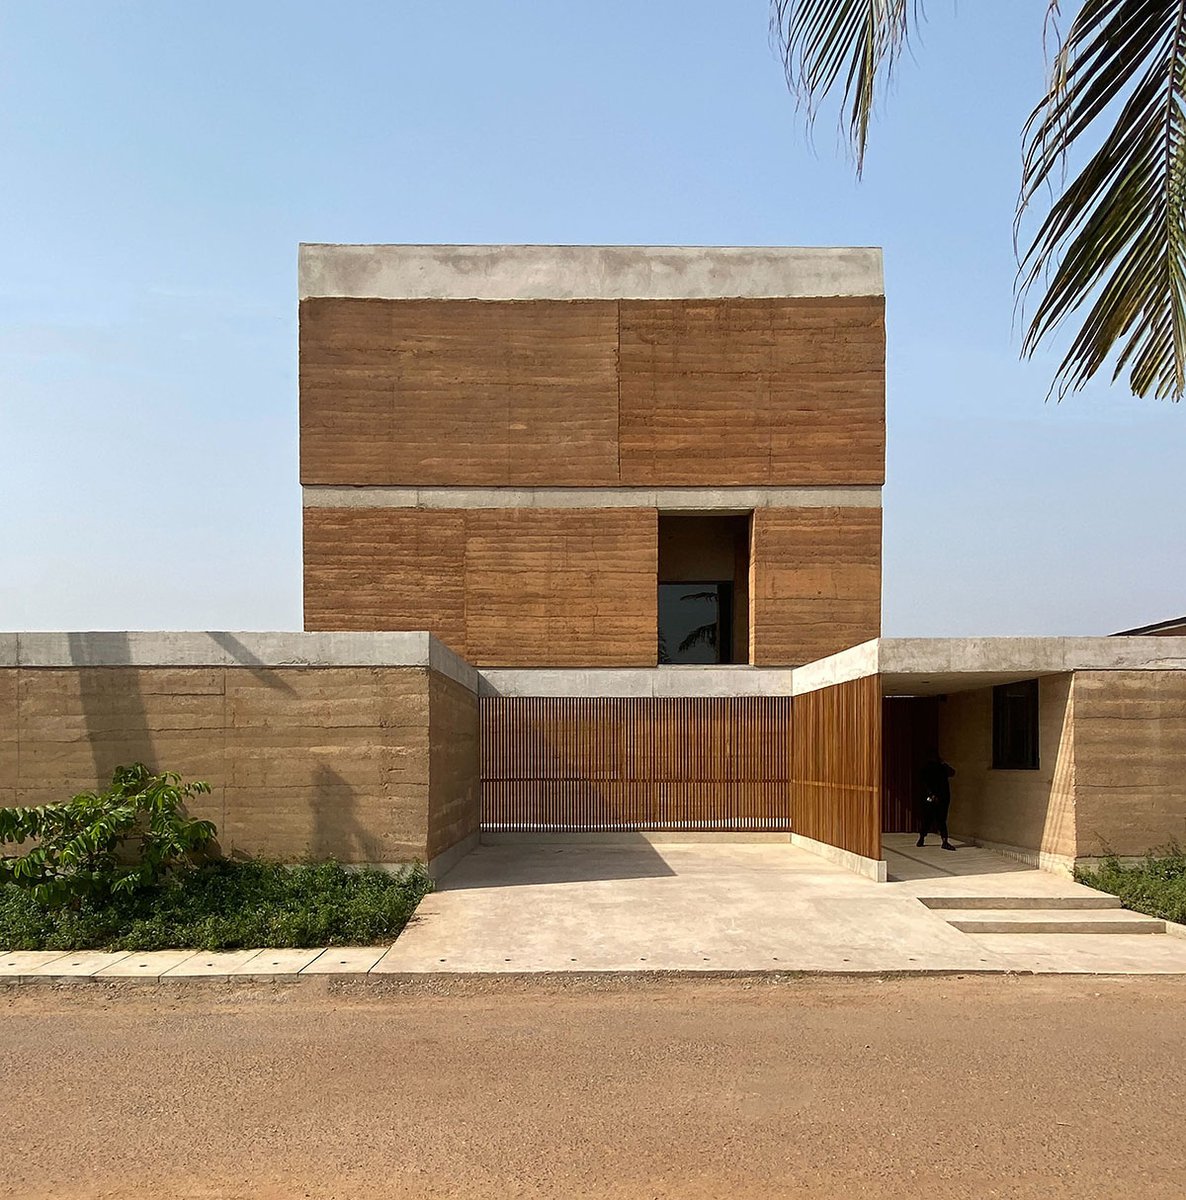 Adjaye Associates built a new home for dot.ateliers' community and art space in Accra: worldarchitecture.org/architecture-n… #architecture #accra